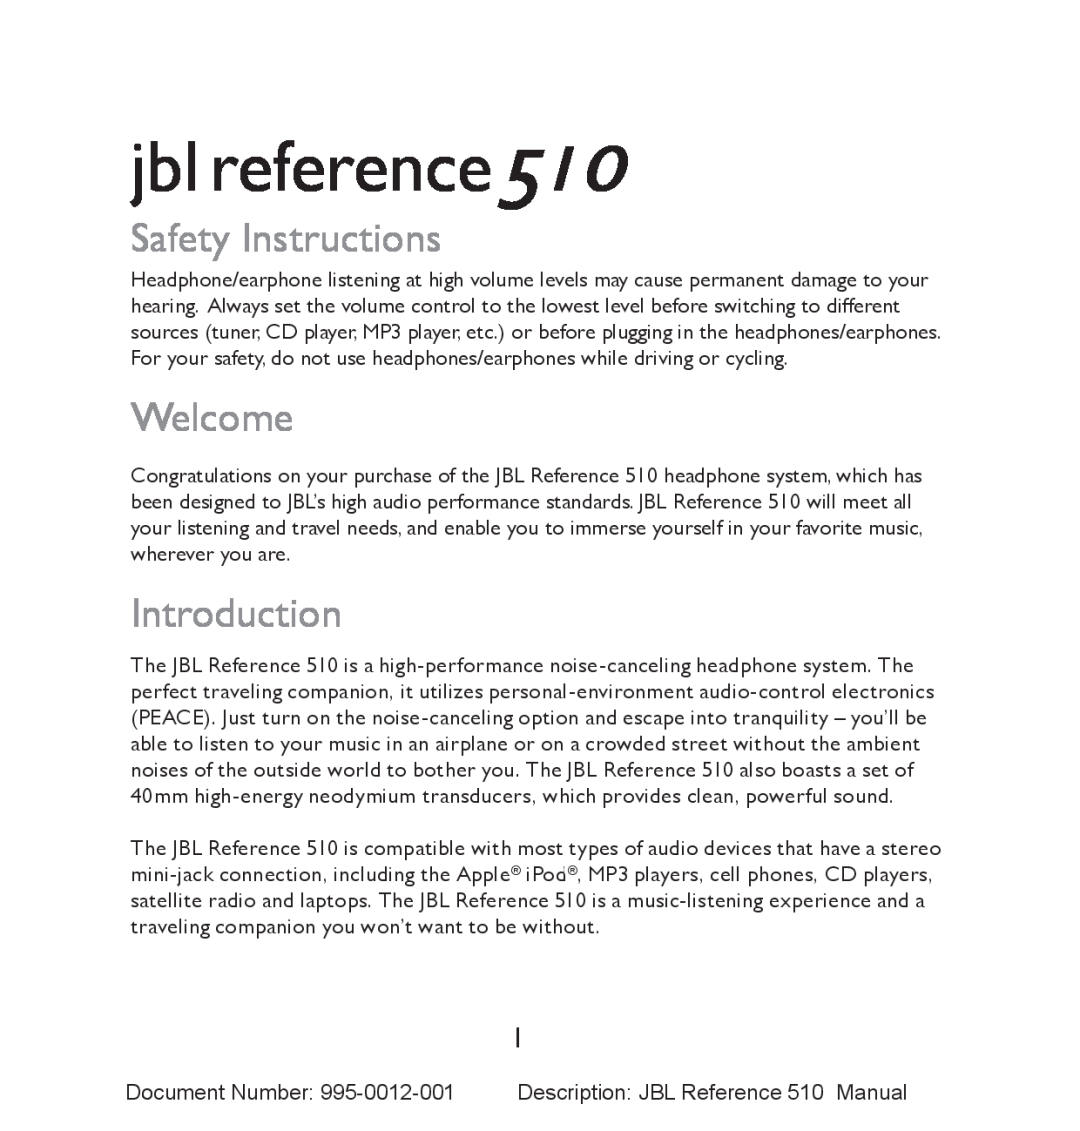 JBL manual jbl reference510, Safety Instructions, Welcome, Introduction 